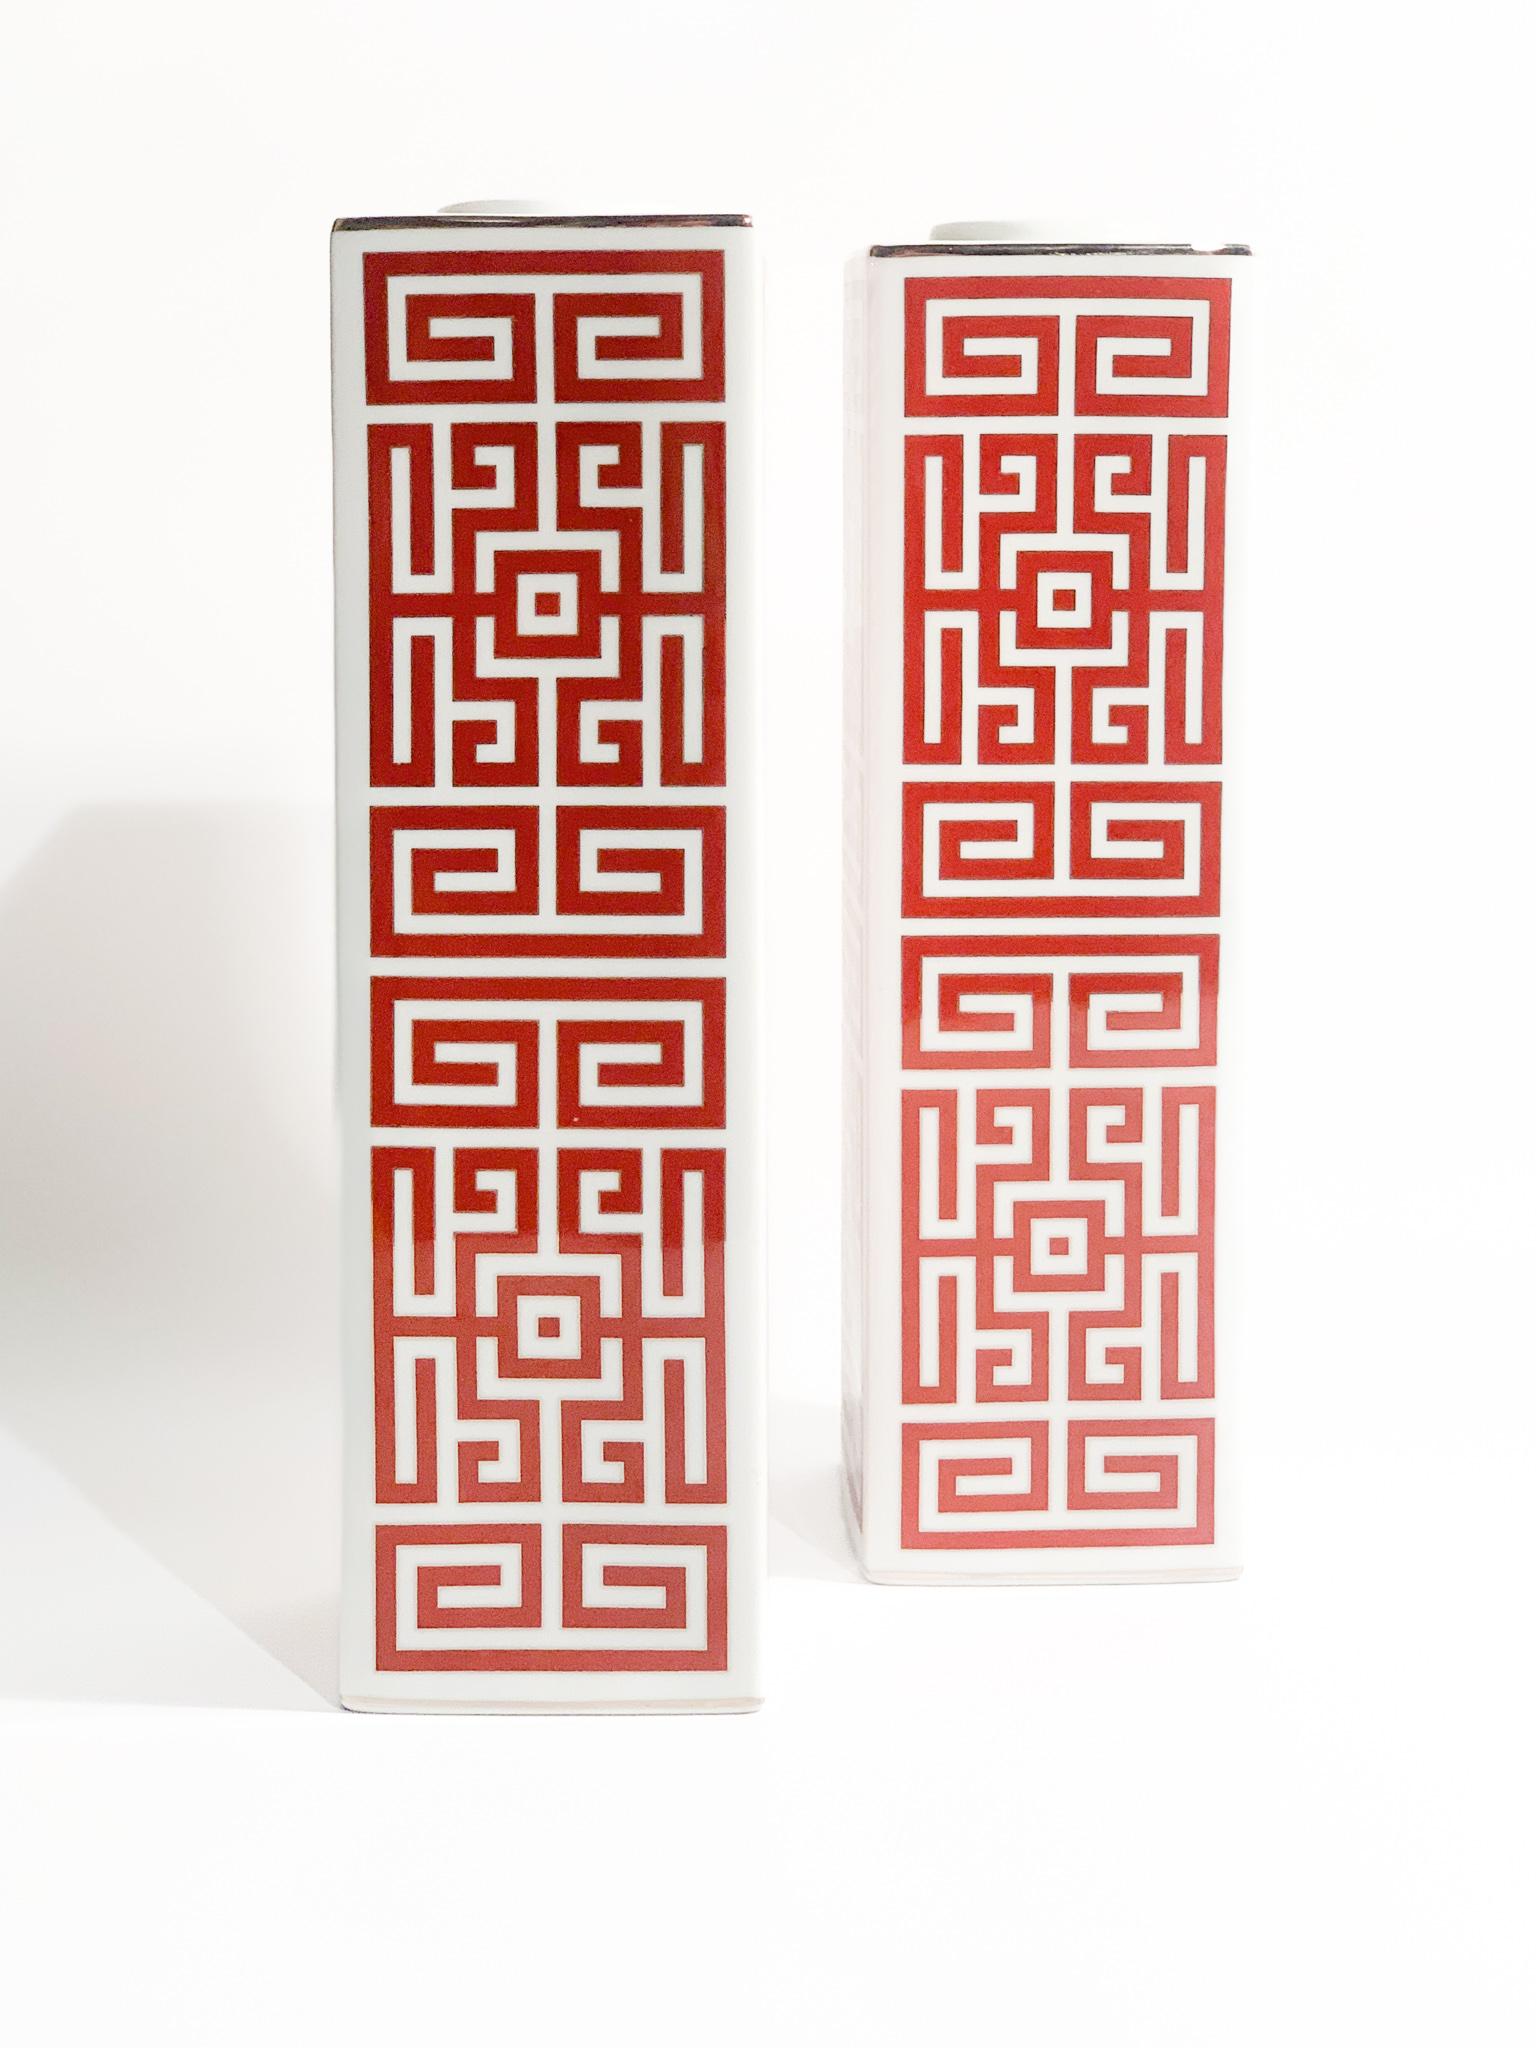 Pair of porcelain vases by Richard Ginori, re-edition of the Labirinto Model designed by Gio Ponti in 1927, scarlet colour. One of the two vases has a slight chip, as shown in the photos. Additional information on request.

Ø cm 9,5 h cm 30

Company